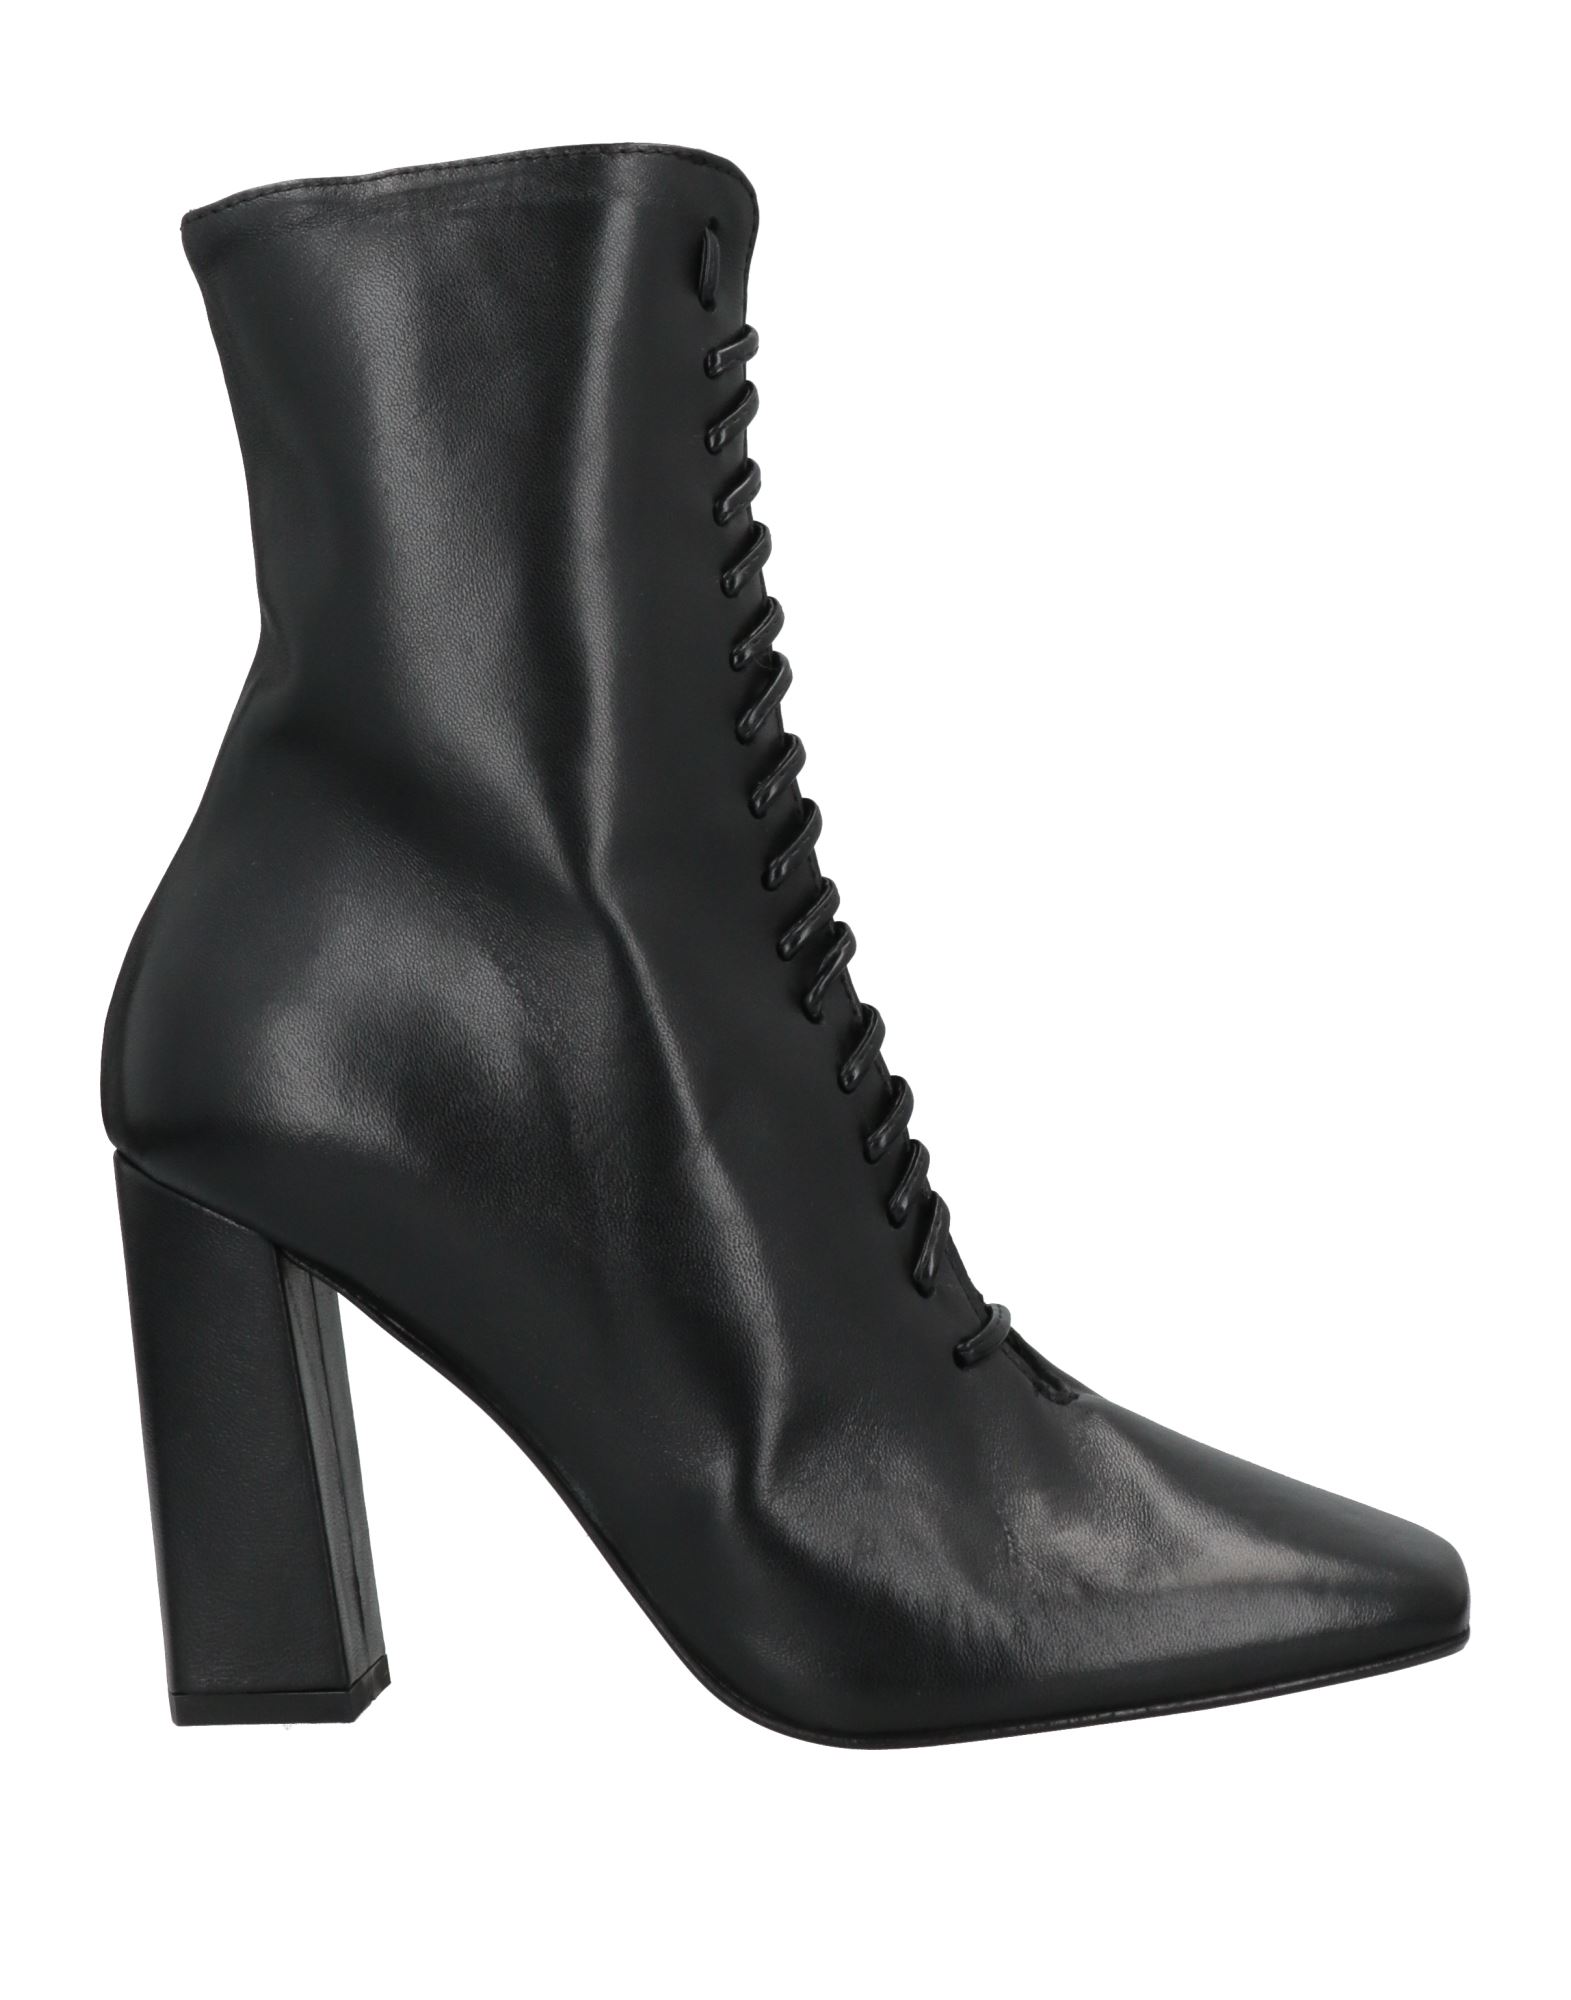 Islo Isabella Lorusso Ankle Boots In Black